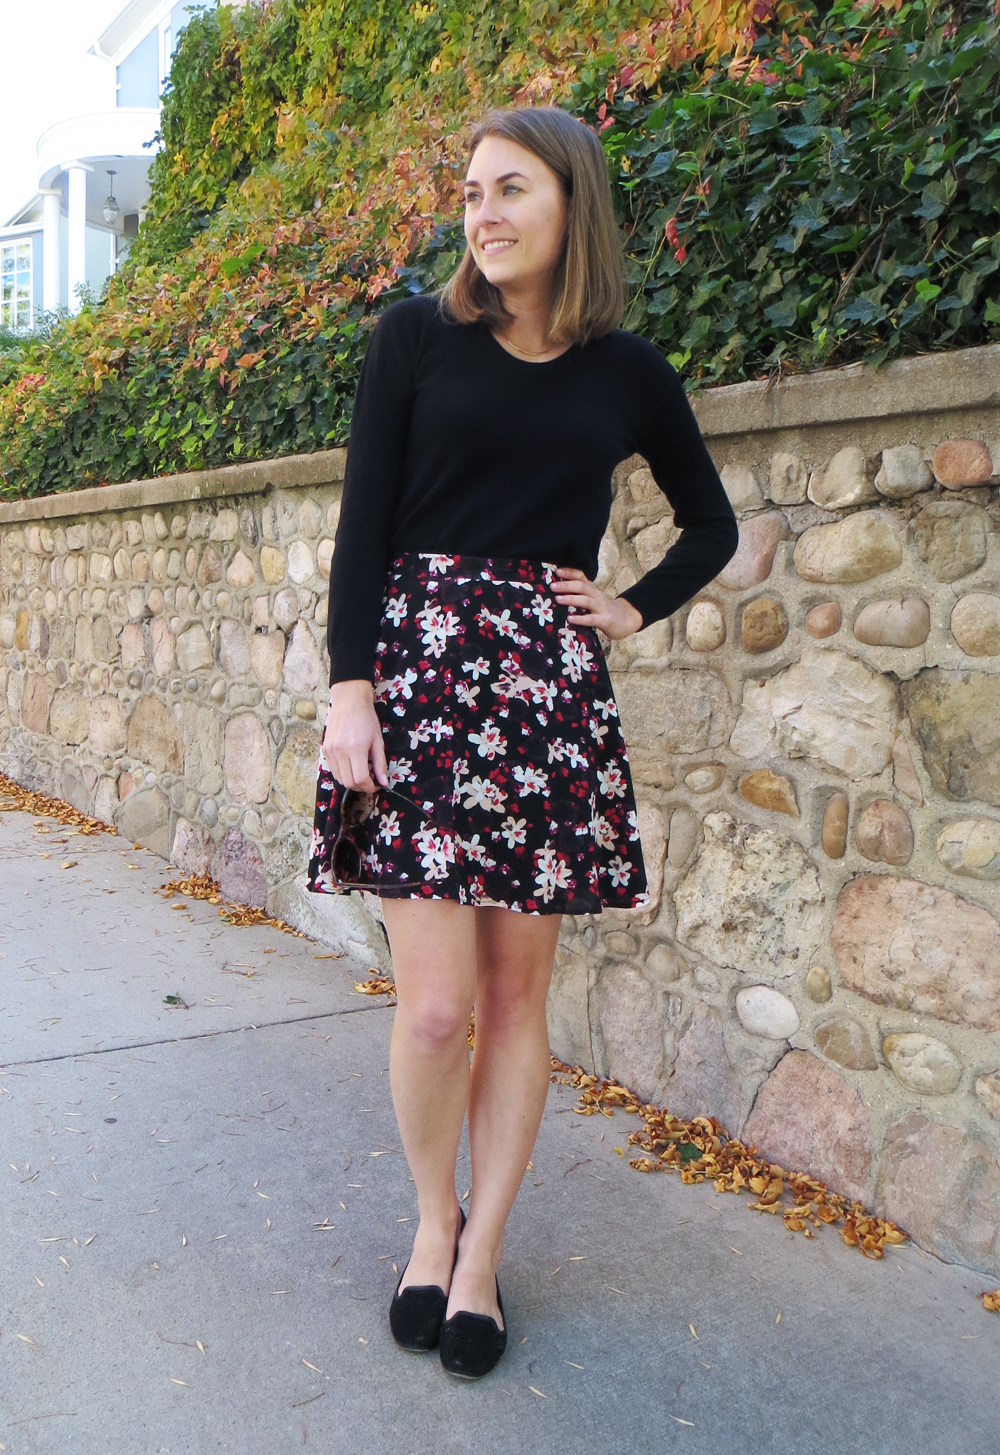 Black Tights with Floral Skirt Outfits (10 ideas & outfits